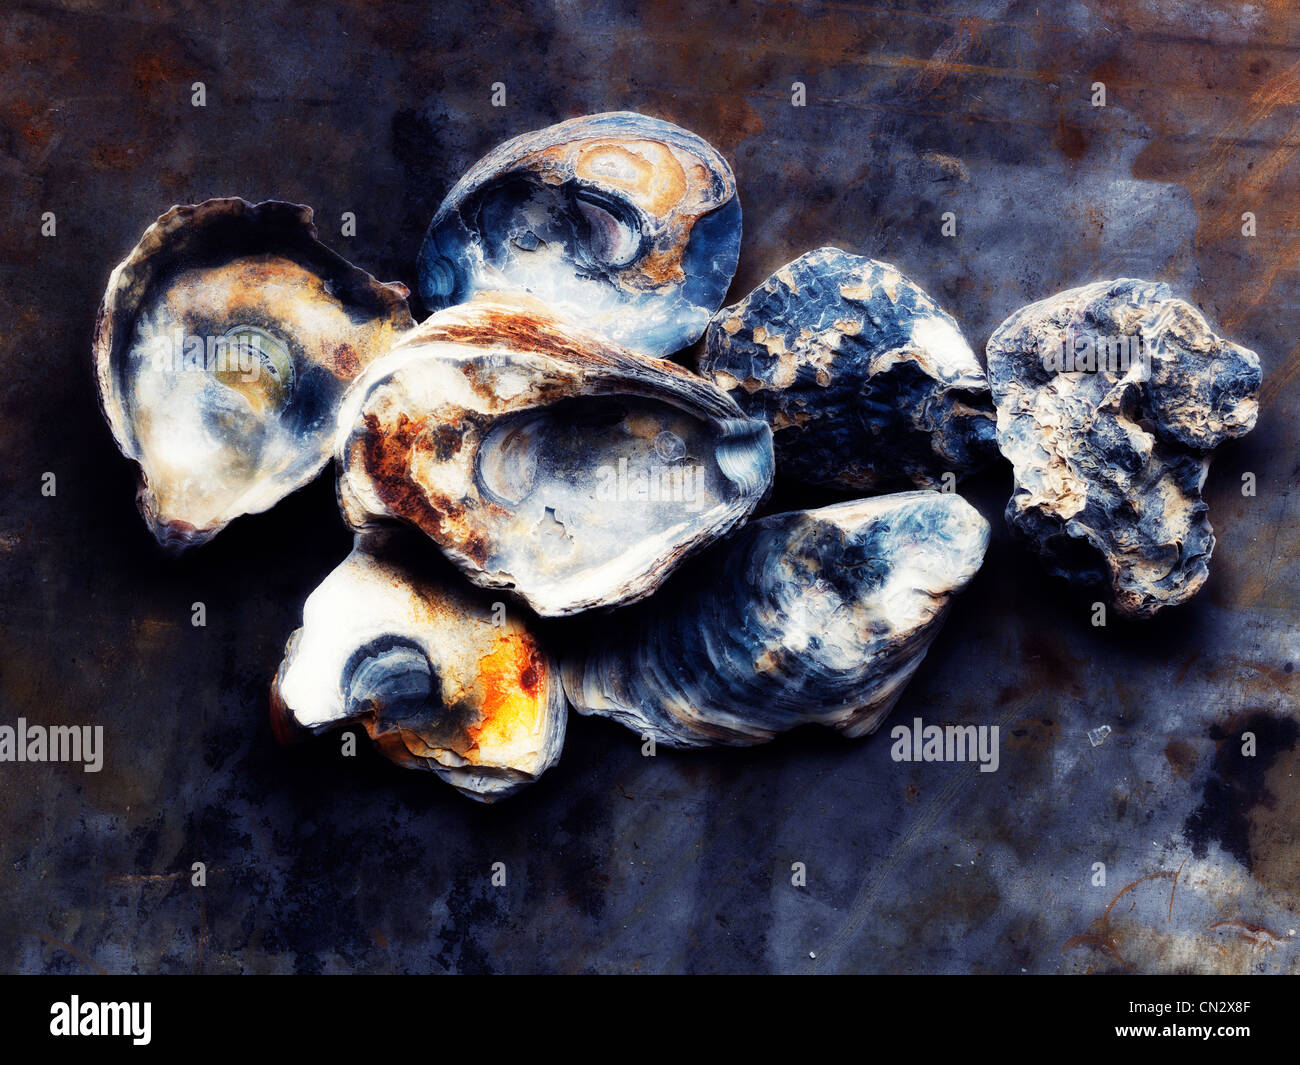 Oyster shells Stock Photo